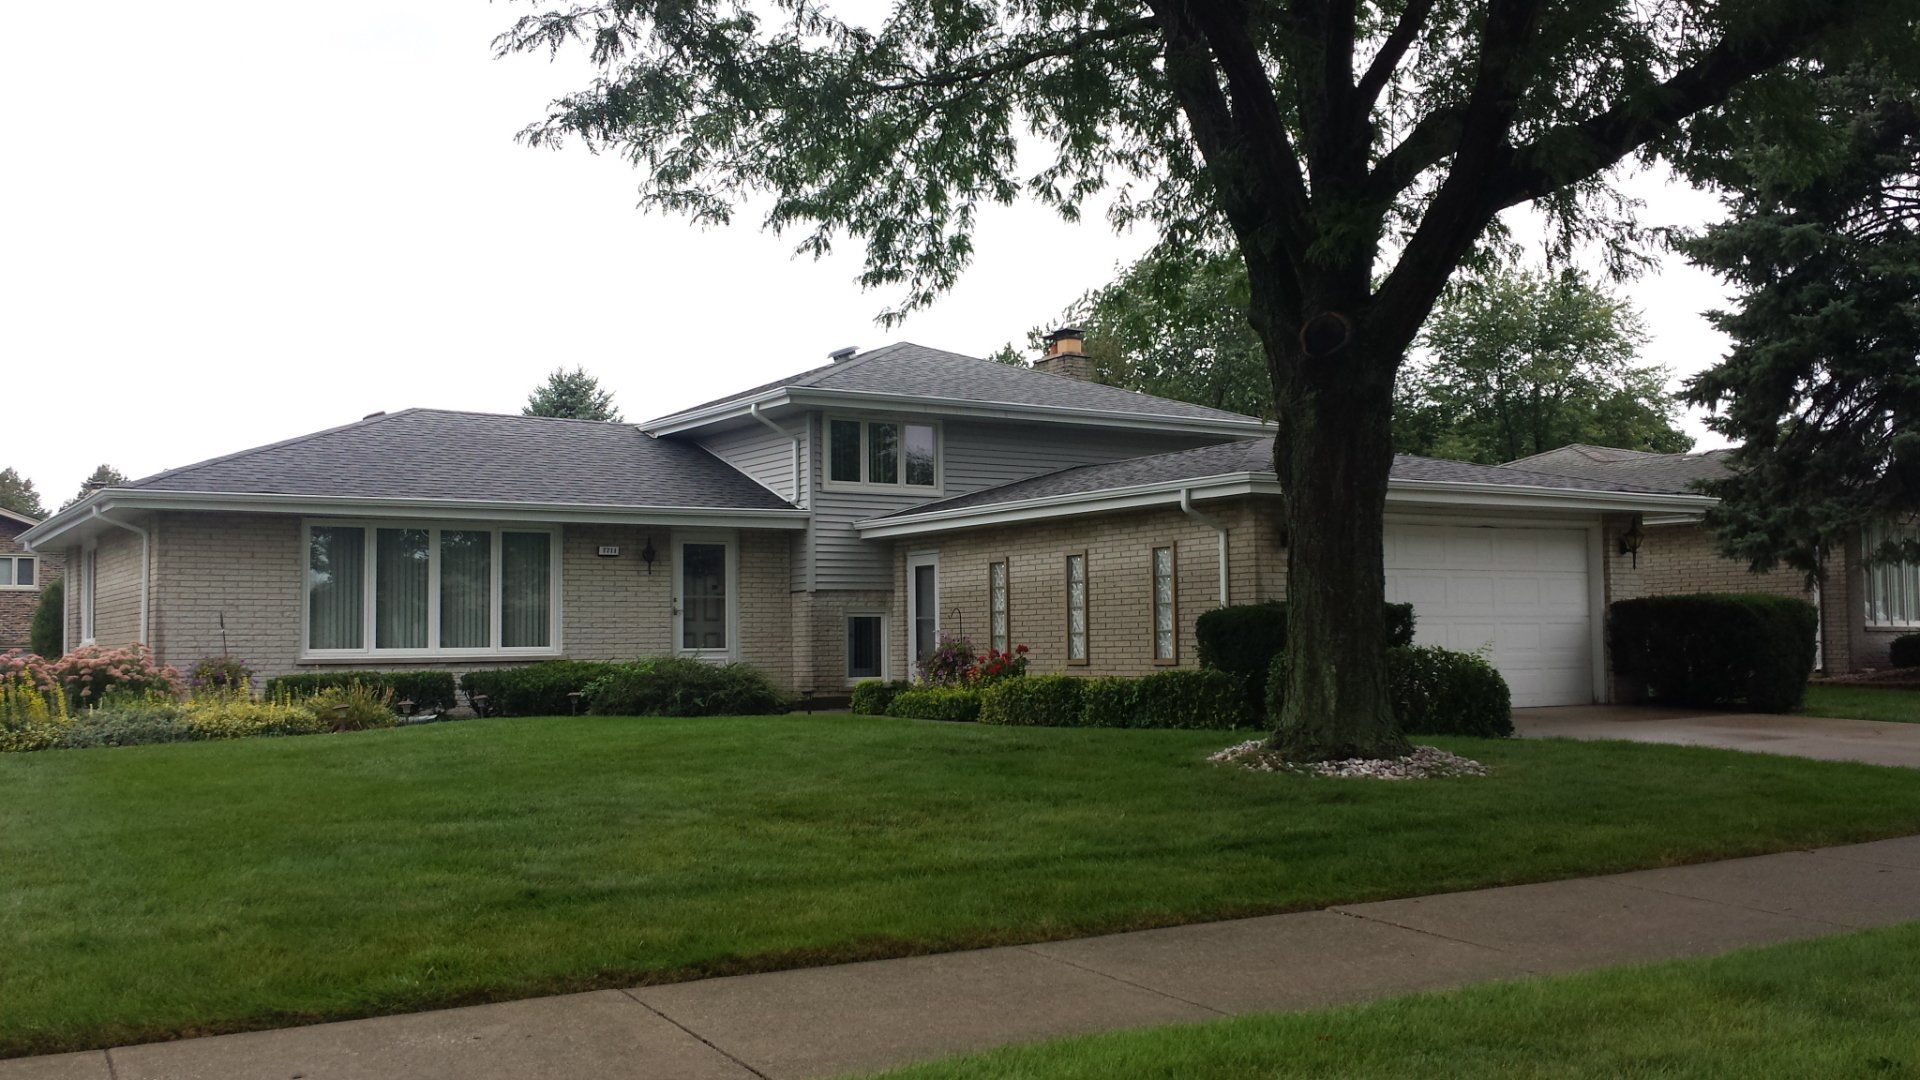 The roof was completed in the summer of 2014 Orland Park, IL